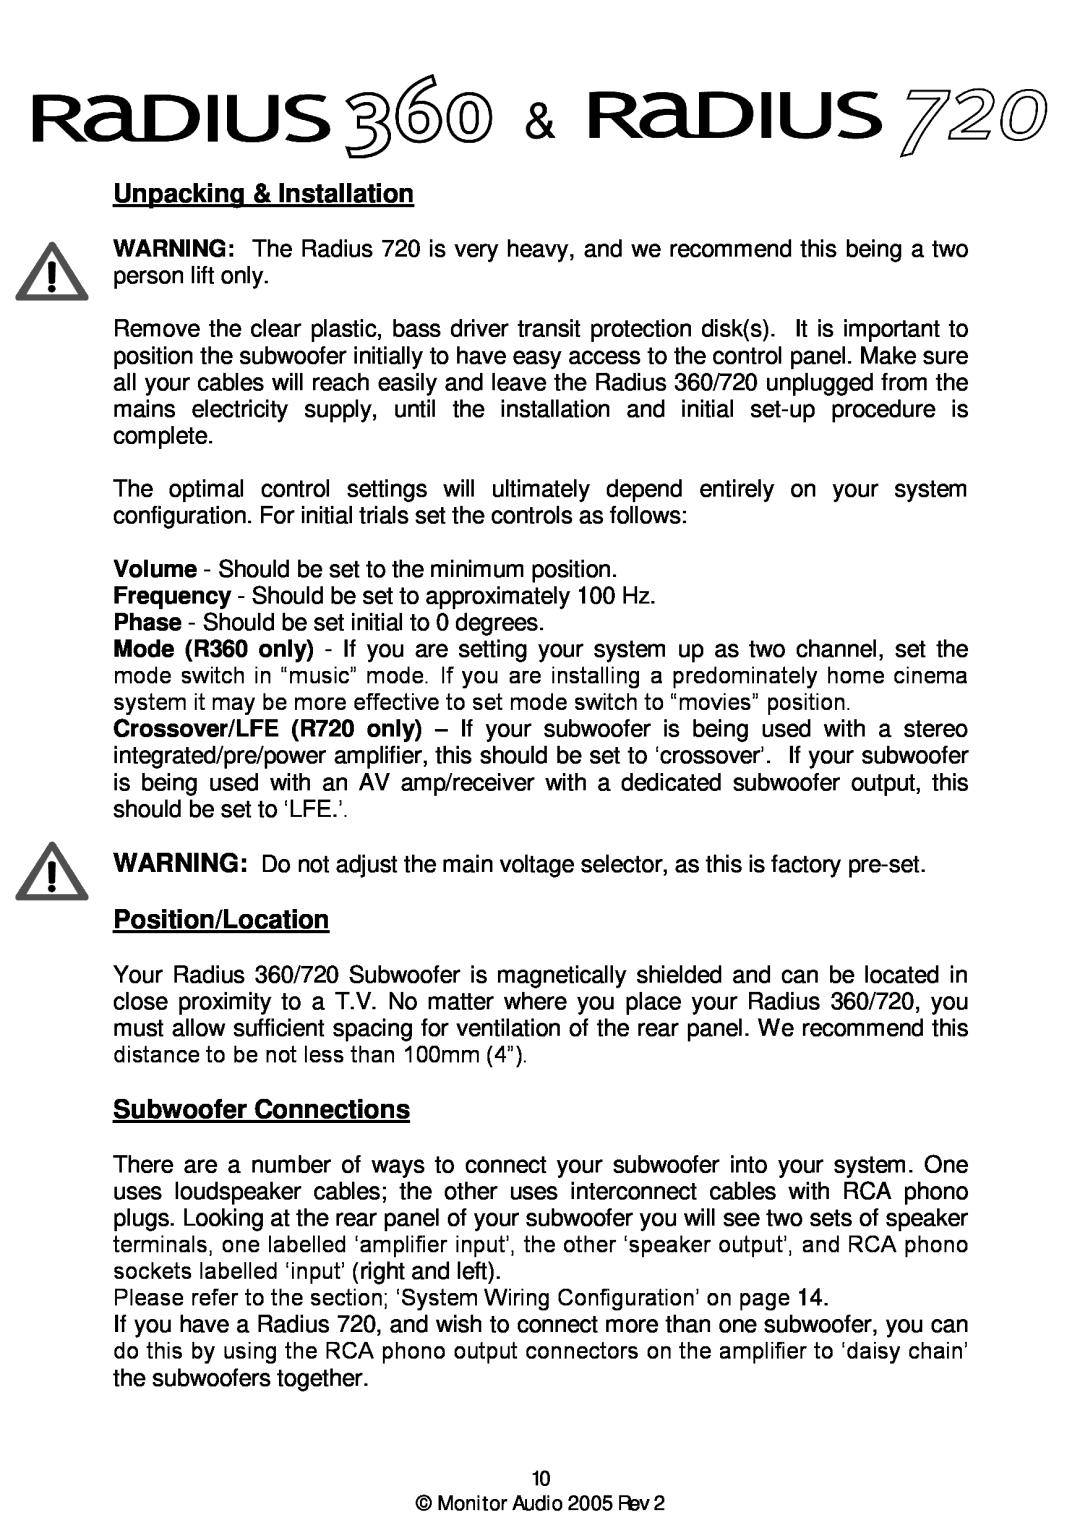 Monitor Audio Monitor Audio 2005 Rev 2 user manual Unpacking & Installation, Position/Location, Subwoofer Connections 